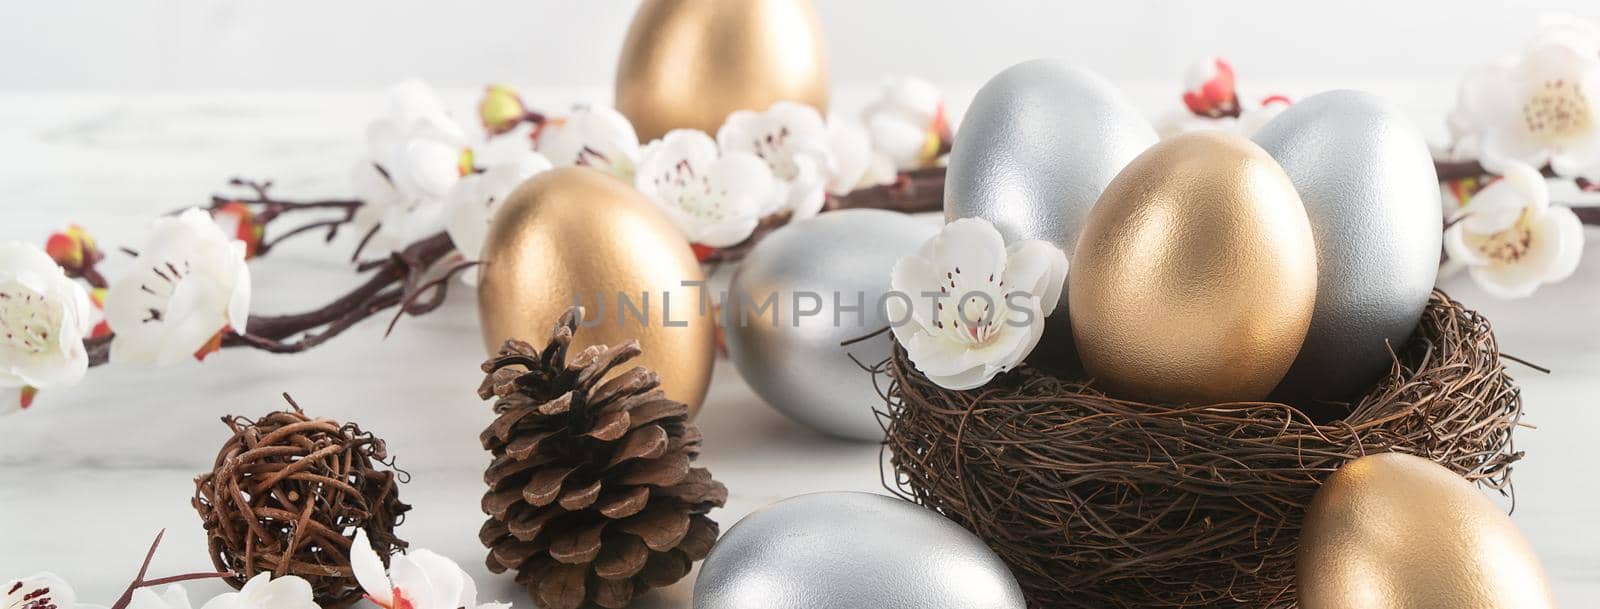 Close up of golden and silver Easter eggs in the nest with white plum flower on bright white wooden table background.